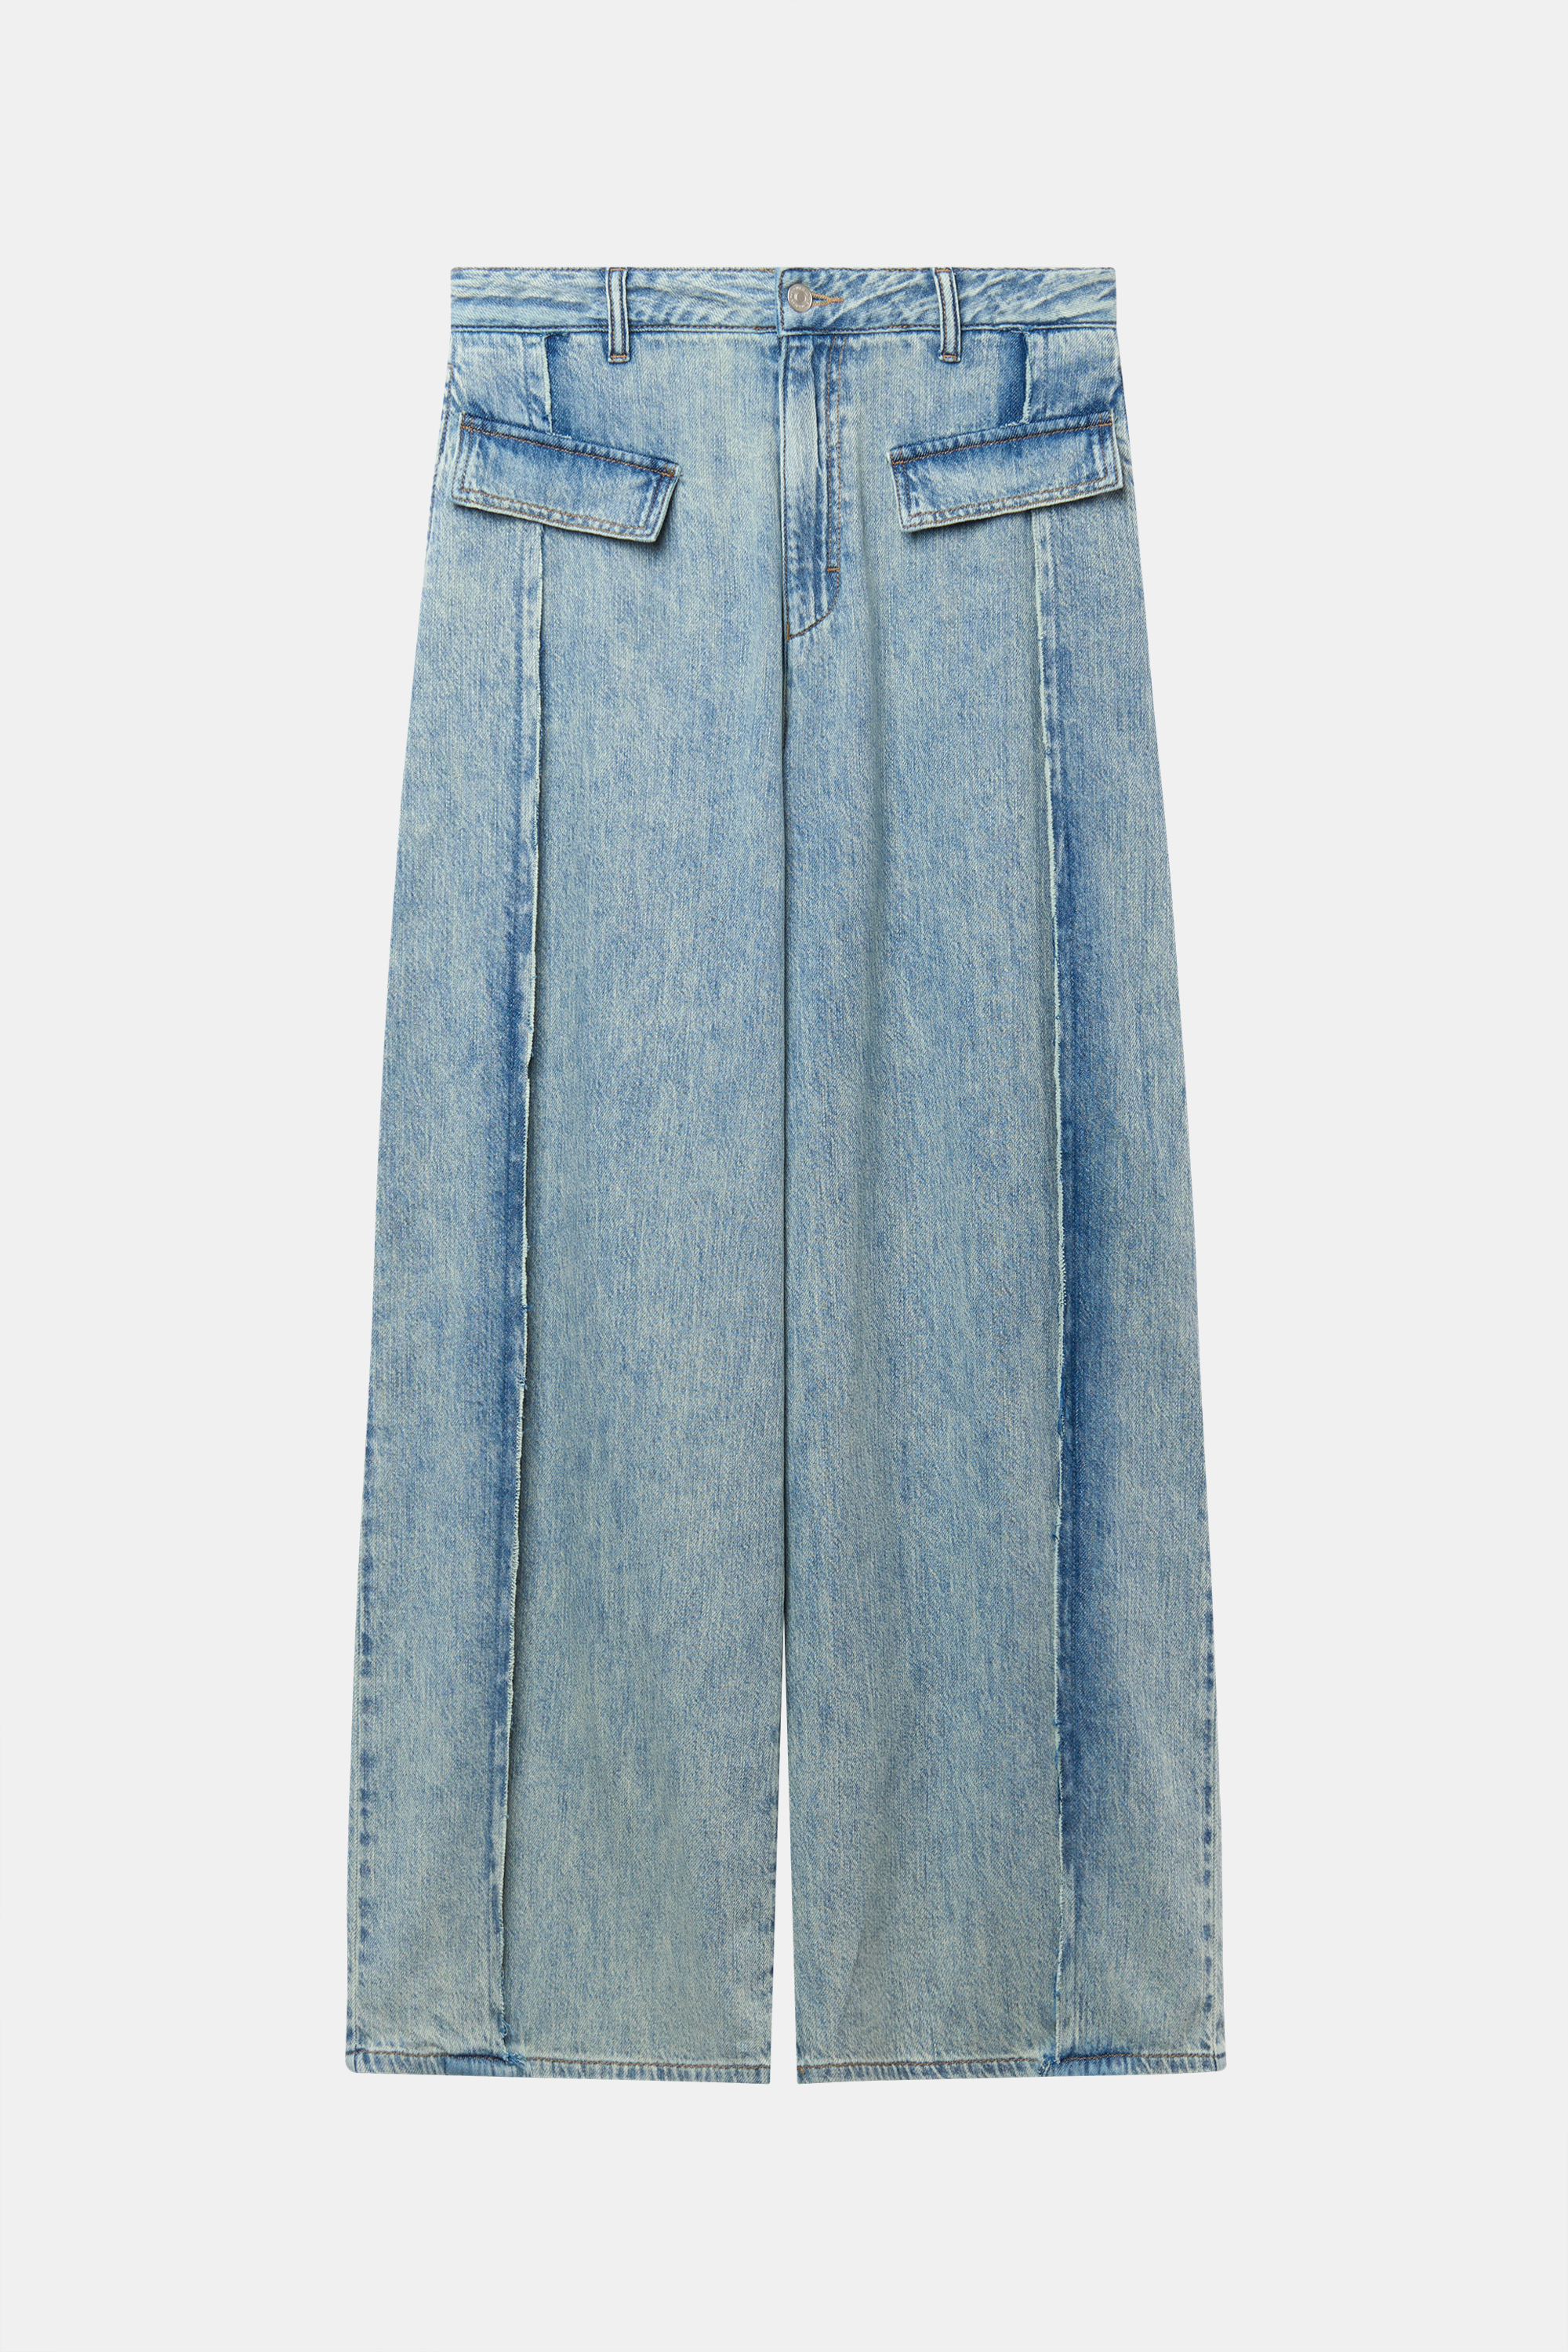 ENDLESS PIN-TUCK JEANS